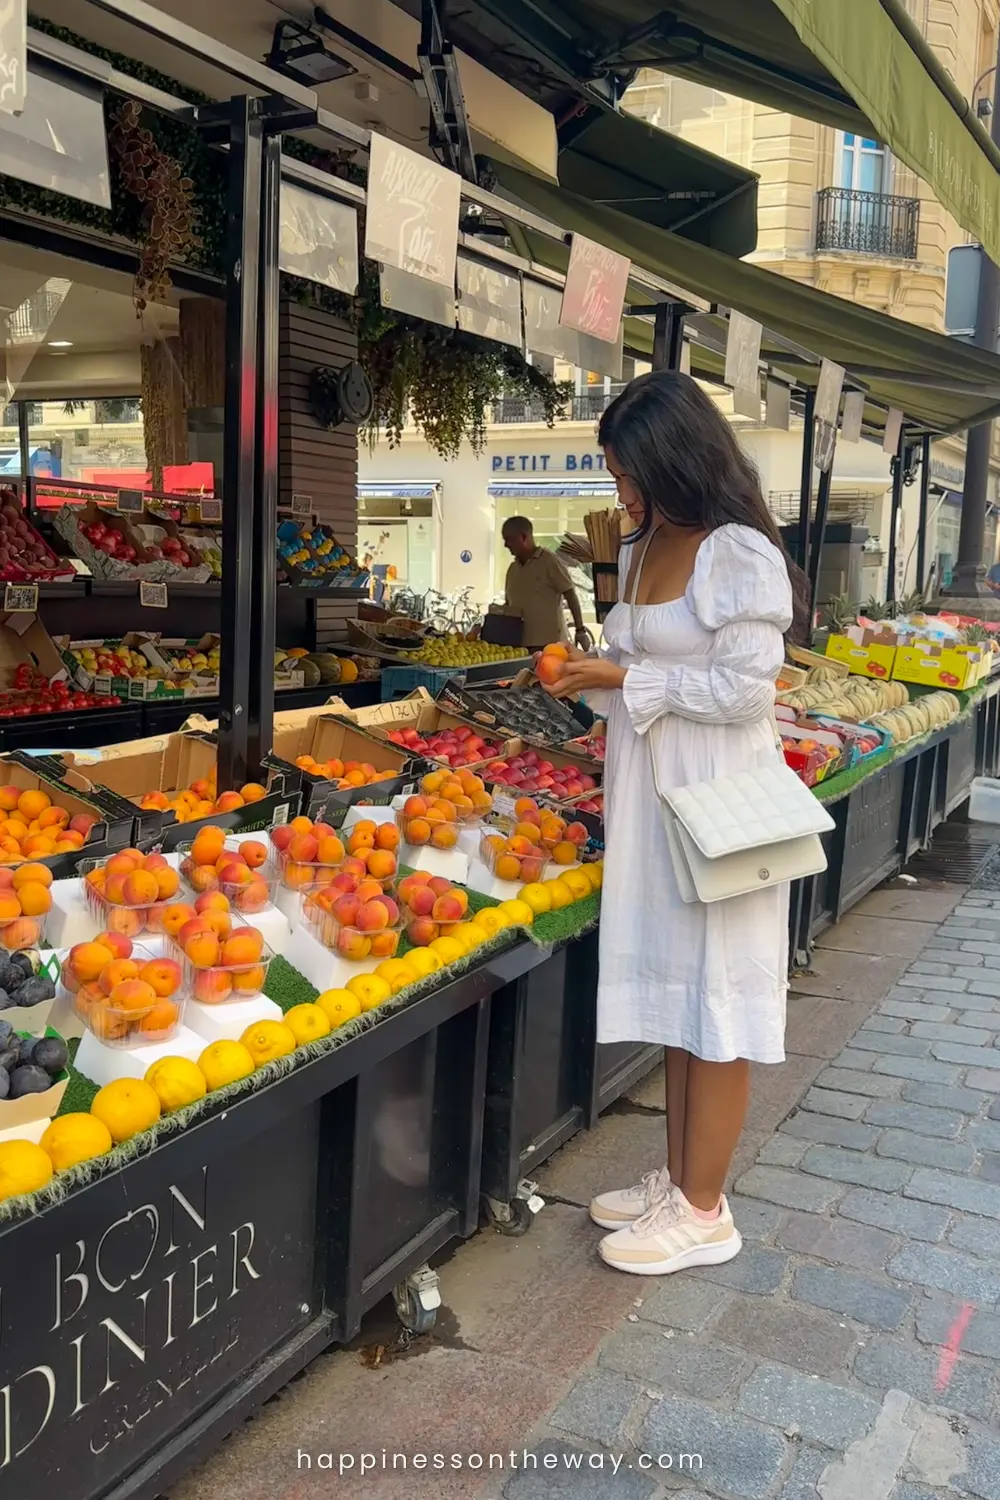 A woman in a white summer dress and sneakers is examining oranges at the Au Bon Jardinier fresh fruit stall at Rue Cler market in Paris. The market display is vibrant with assorted fruits, and the scene captures a typical sunny day with patrons browsing in the background, highlighting the local Parisian shopping experience.